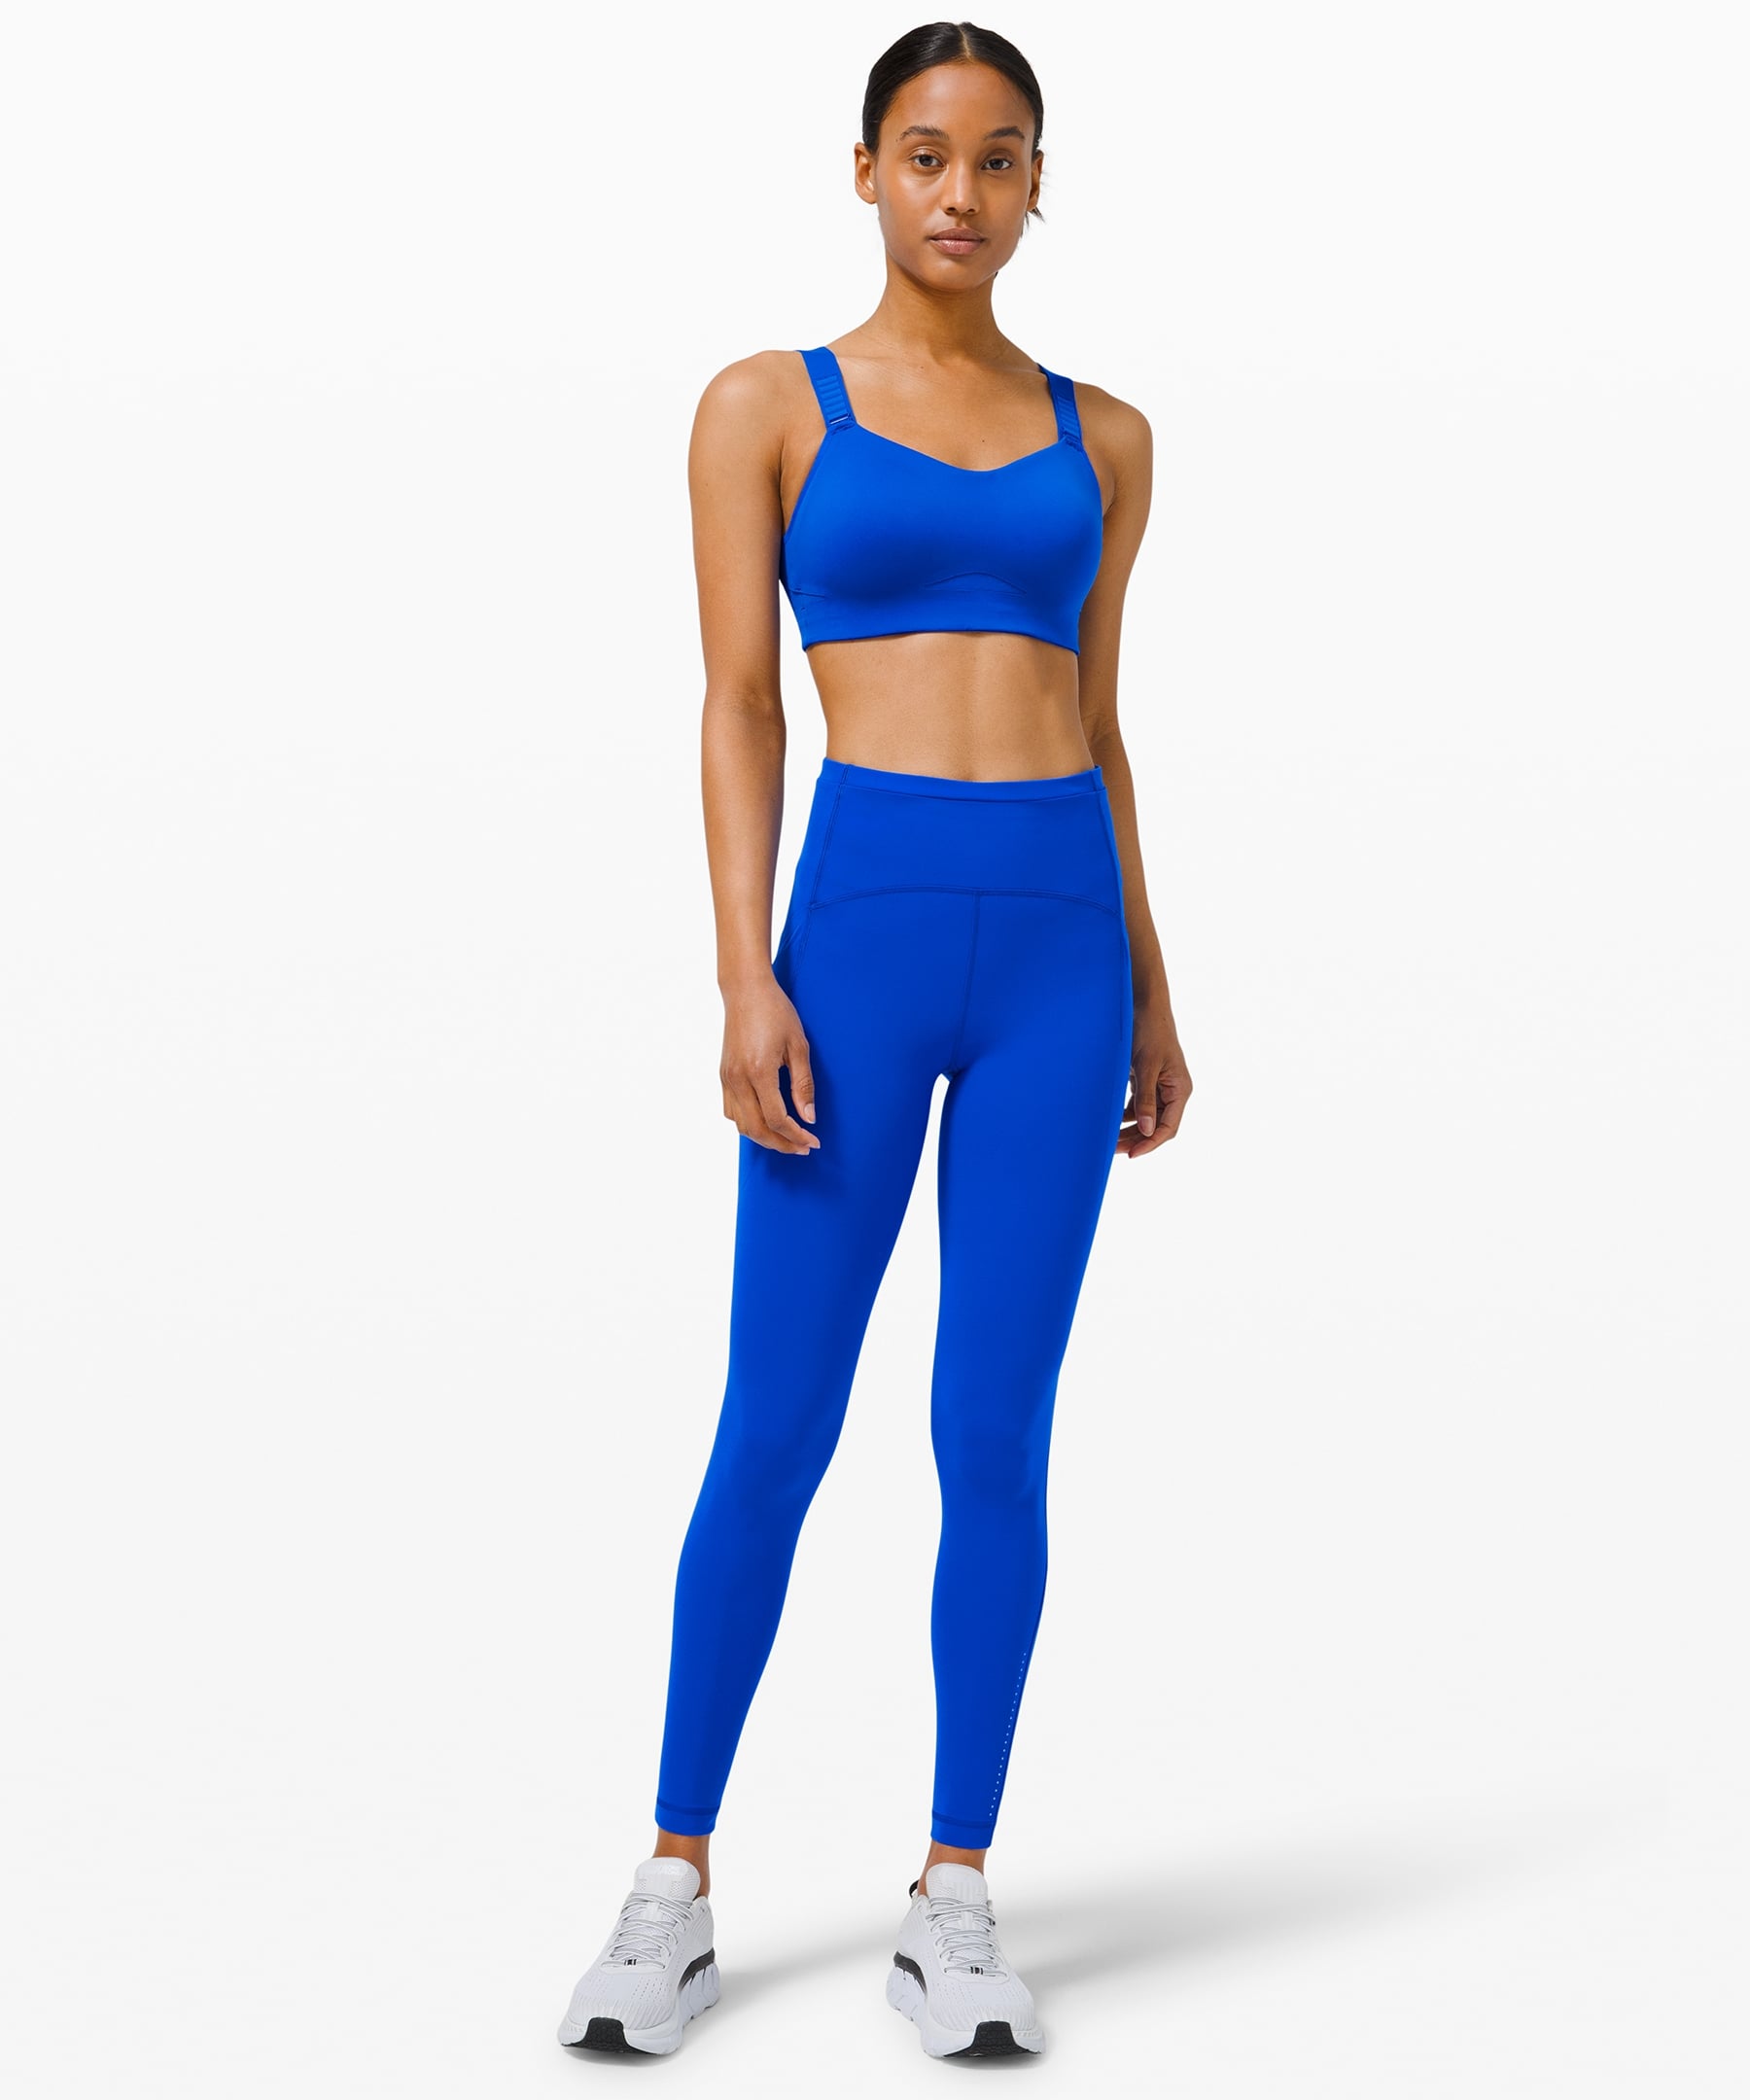 Lululemon Swift Speed High-Rise Tight and Bra, 13 Matching Sets You Can  Shop at Lululemon, Because Your Shades of Black Should Match